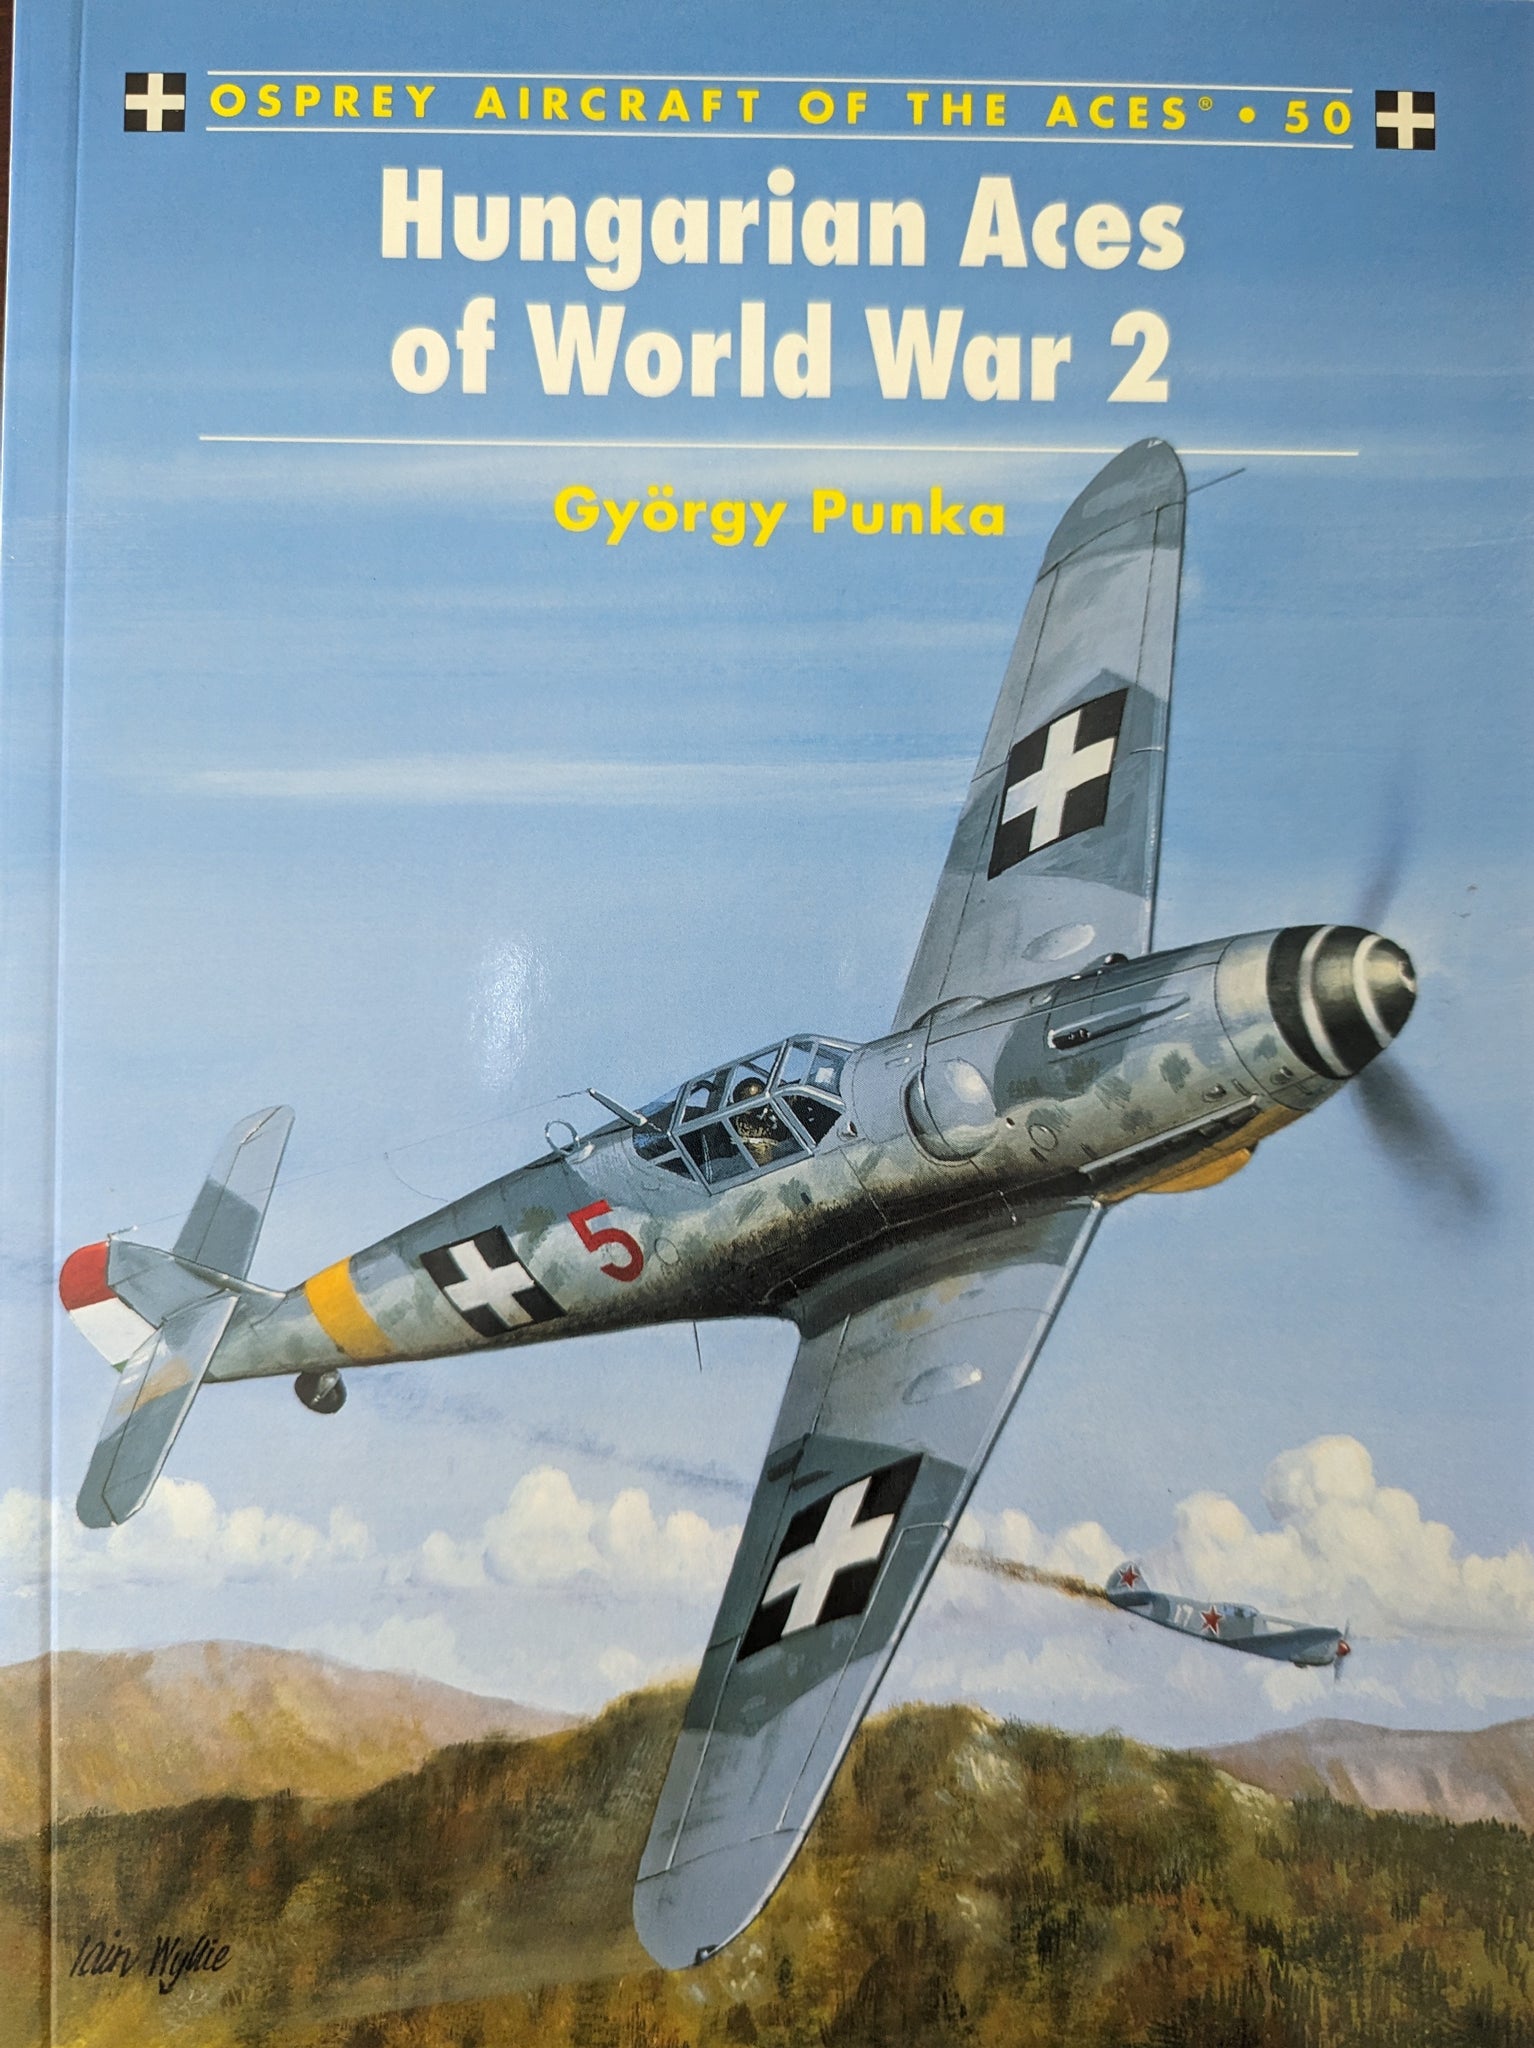 HUNGARIAN ACES OF WORLD WAR 2 (Osprey Aircraft of the Aces No 50)